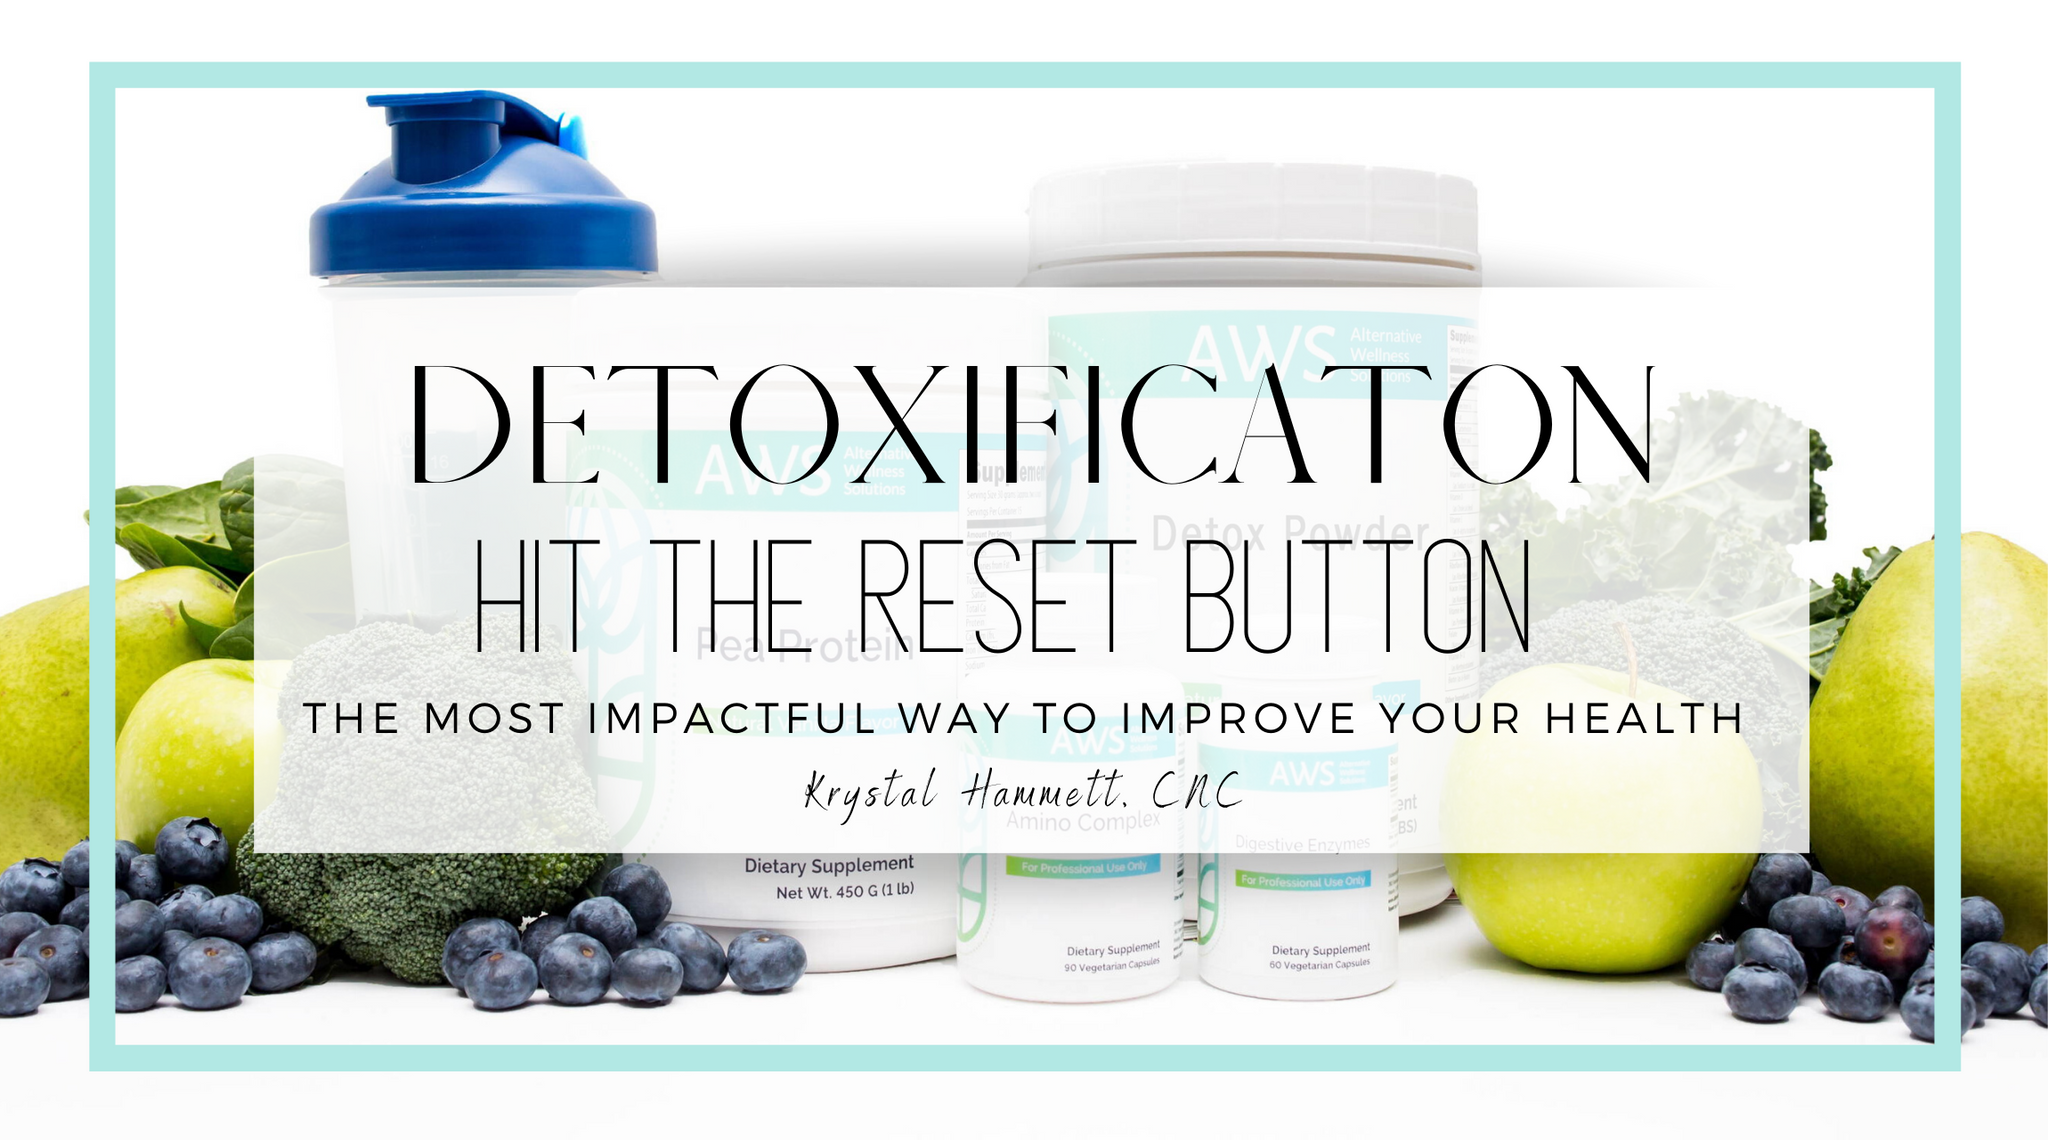 Detox: The Most Impactful Way to Improve your Health!